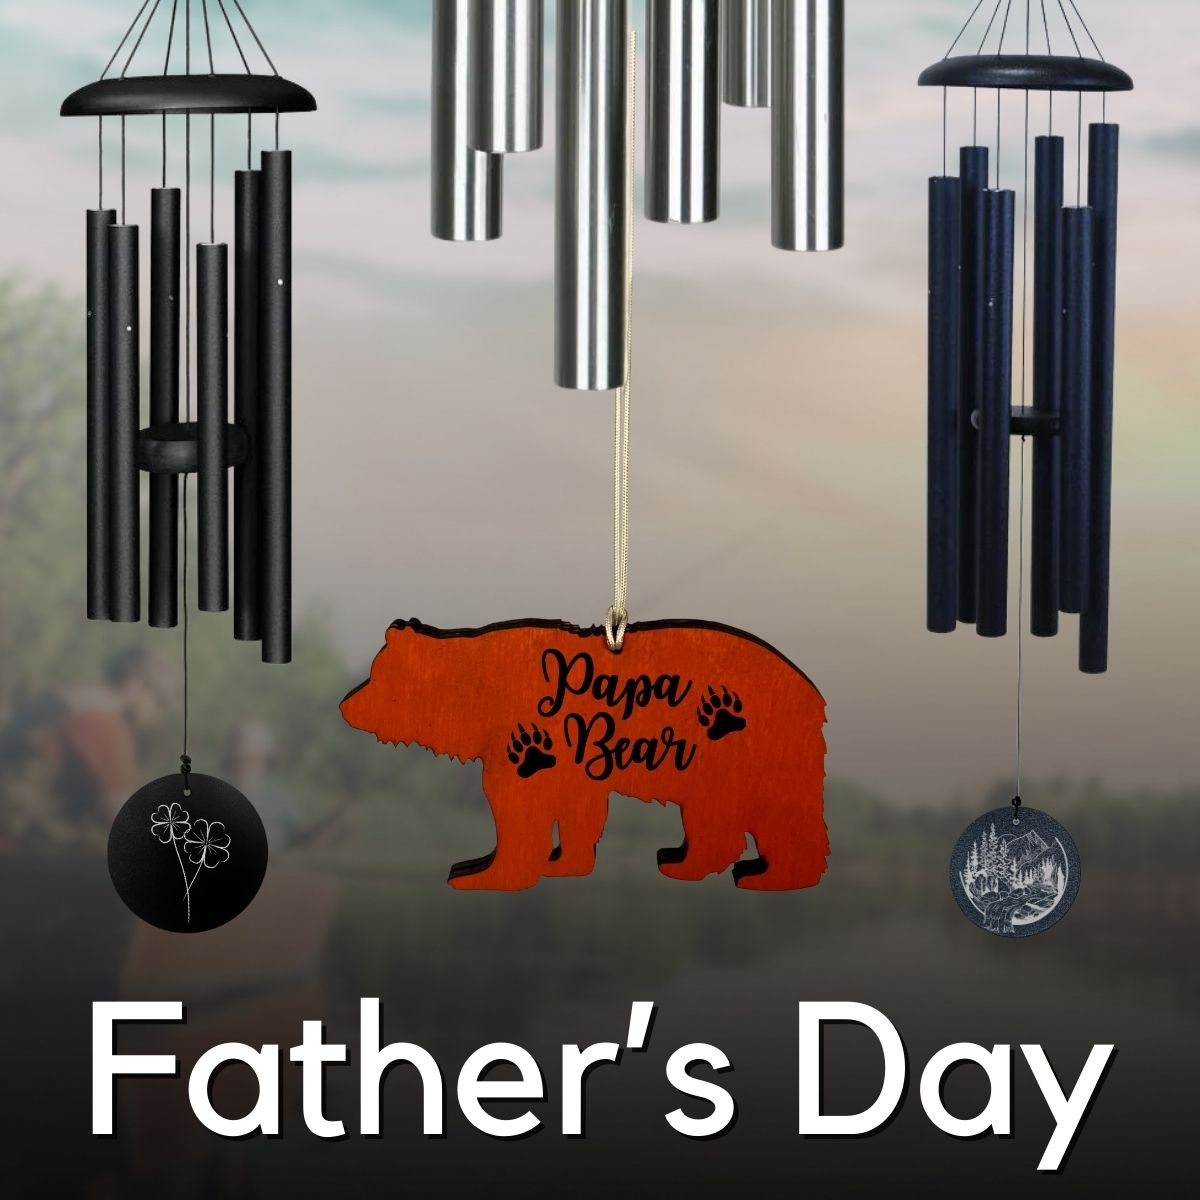 Wind Chimes for Dad: Perfect Father's Day Gifts He'll Love!